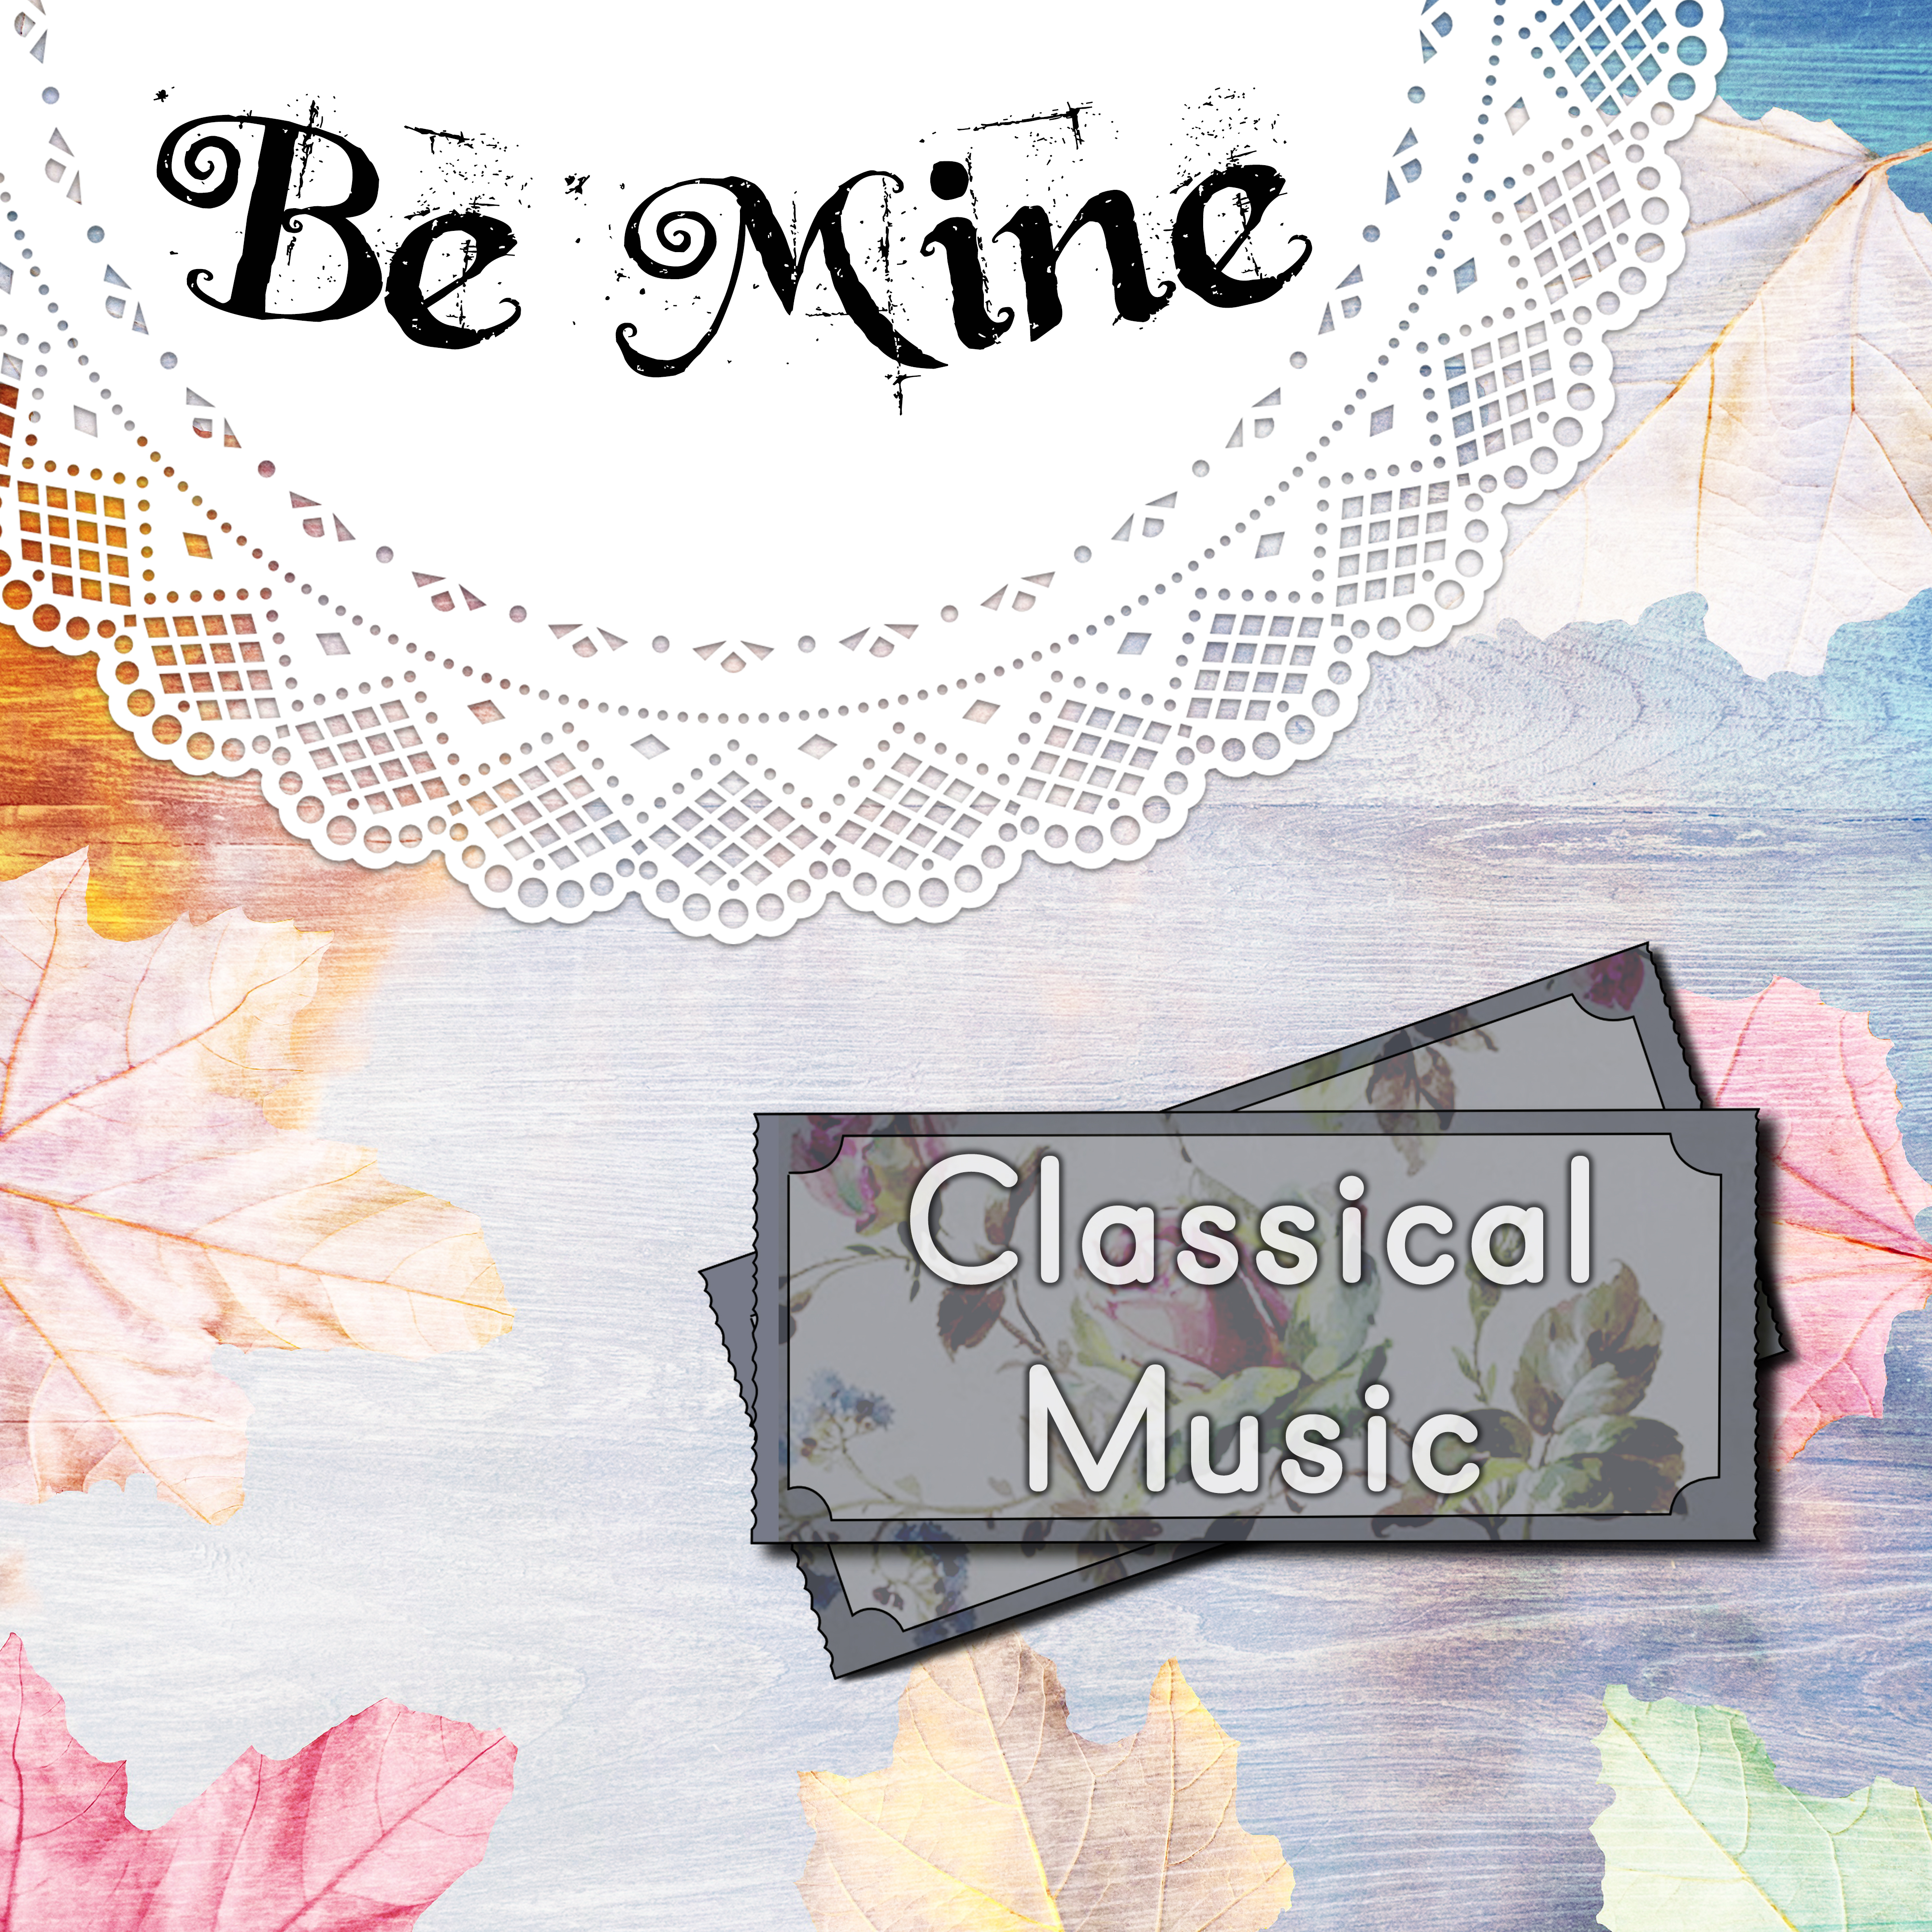 Be Mine Classical Music  Buy Me, Favorite Music, Take Me, Instrumental Music, Access To Classical Music